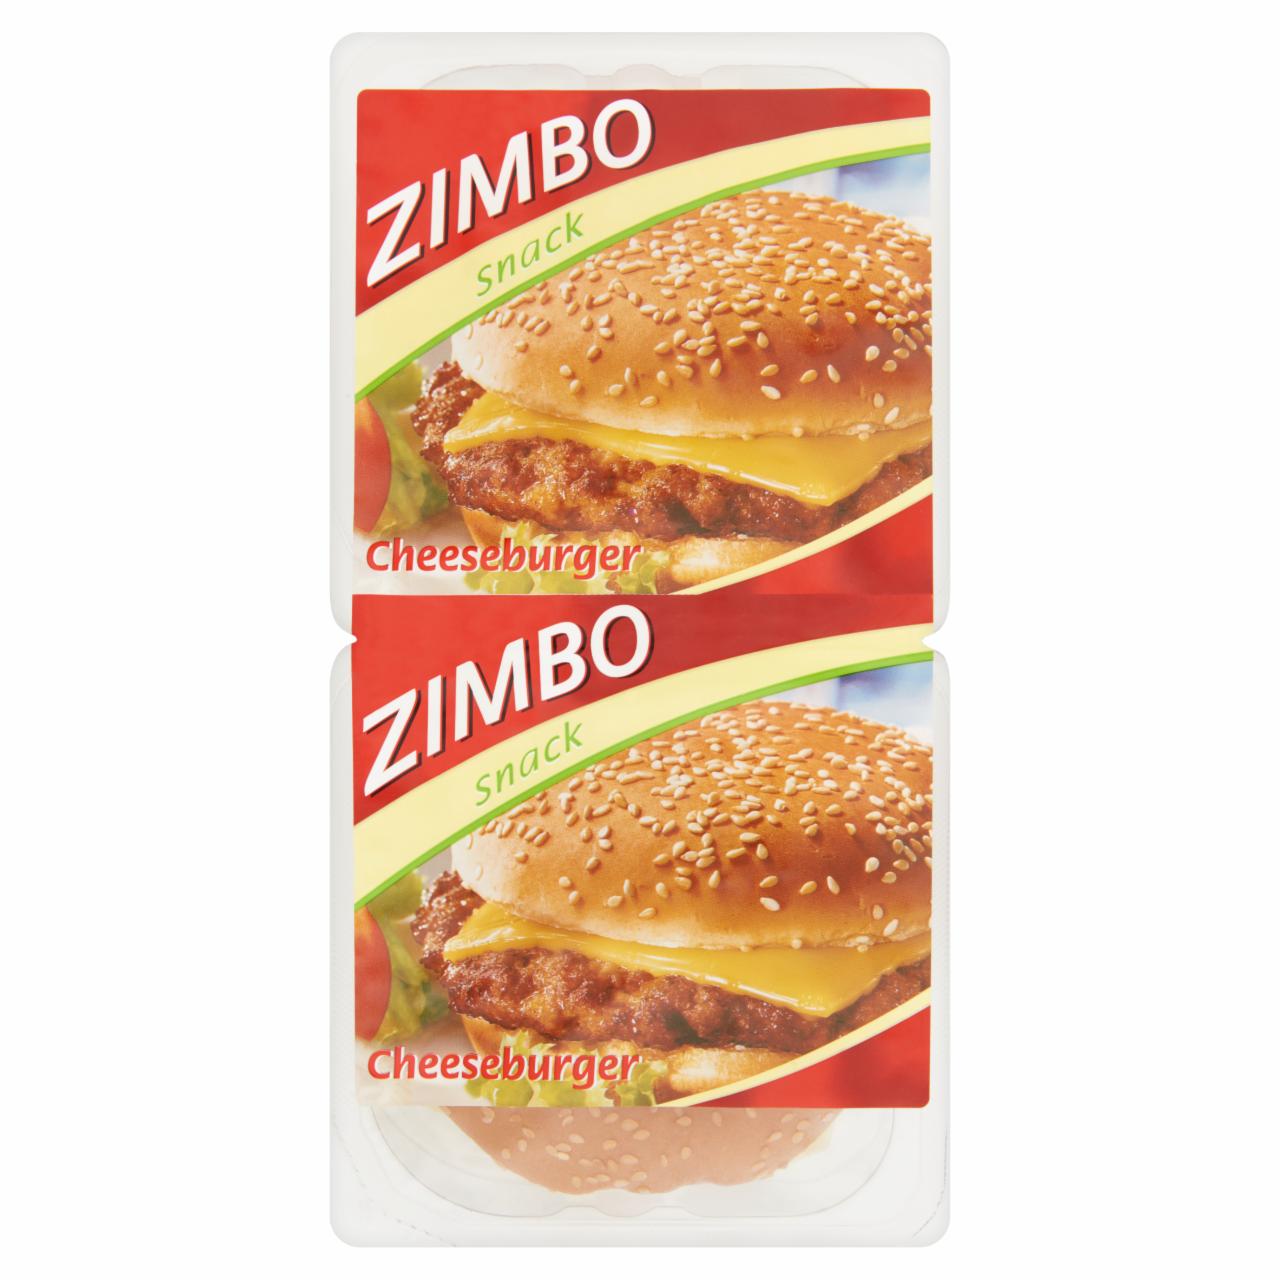 Photo - Zimbo Snack Cheeseburger Fried Burgers with Cheese in Sesame Seed Bun 2 pcs 280 g